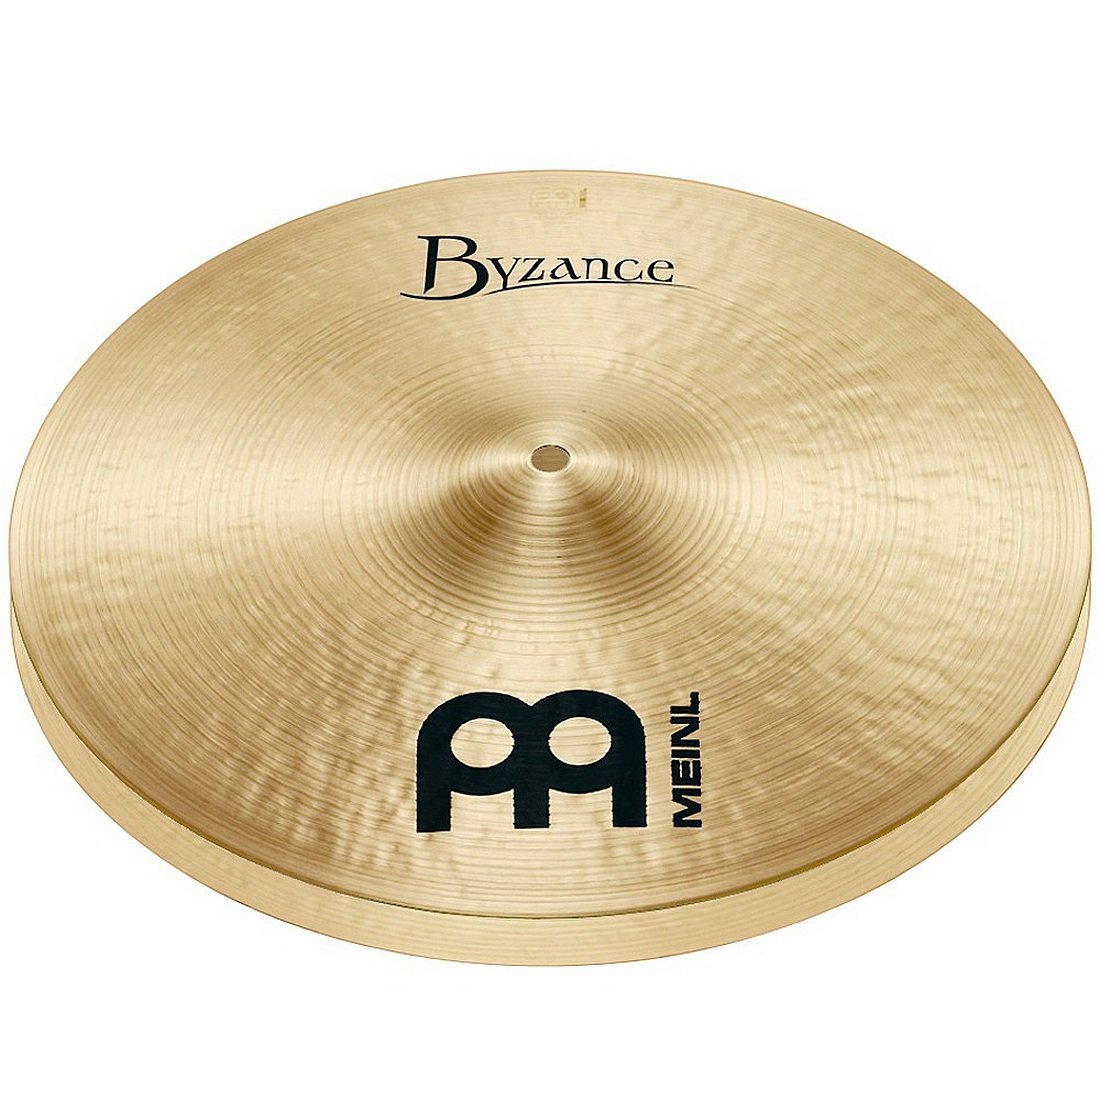 An image of Meinl Byzance Traditional 14" Medium Hi-Hats | PMT Online